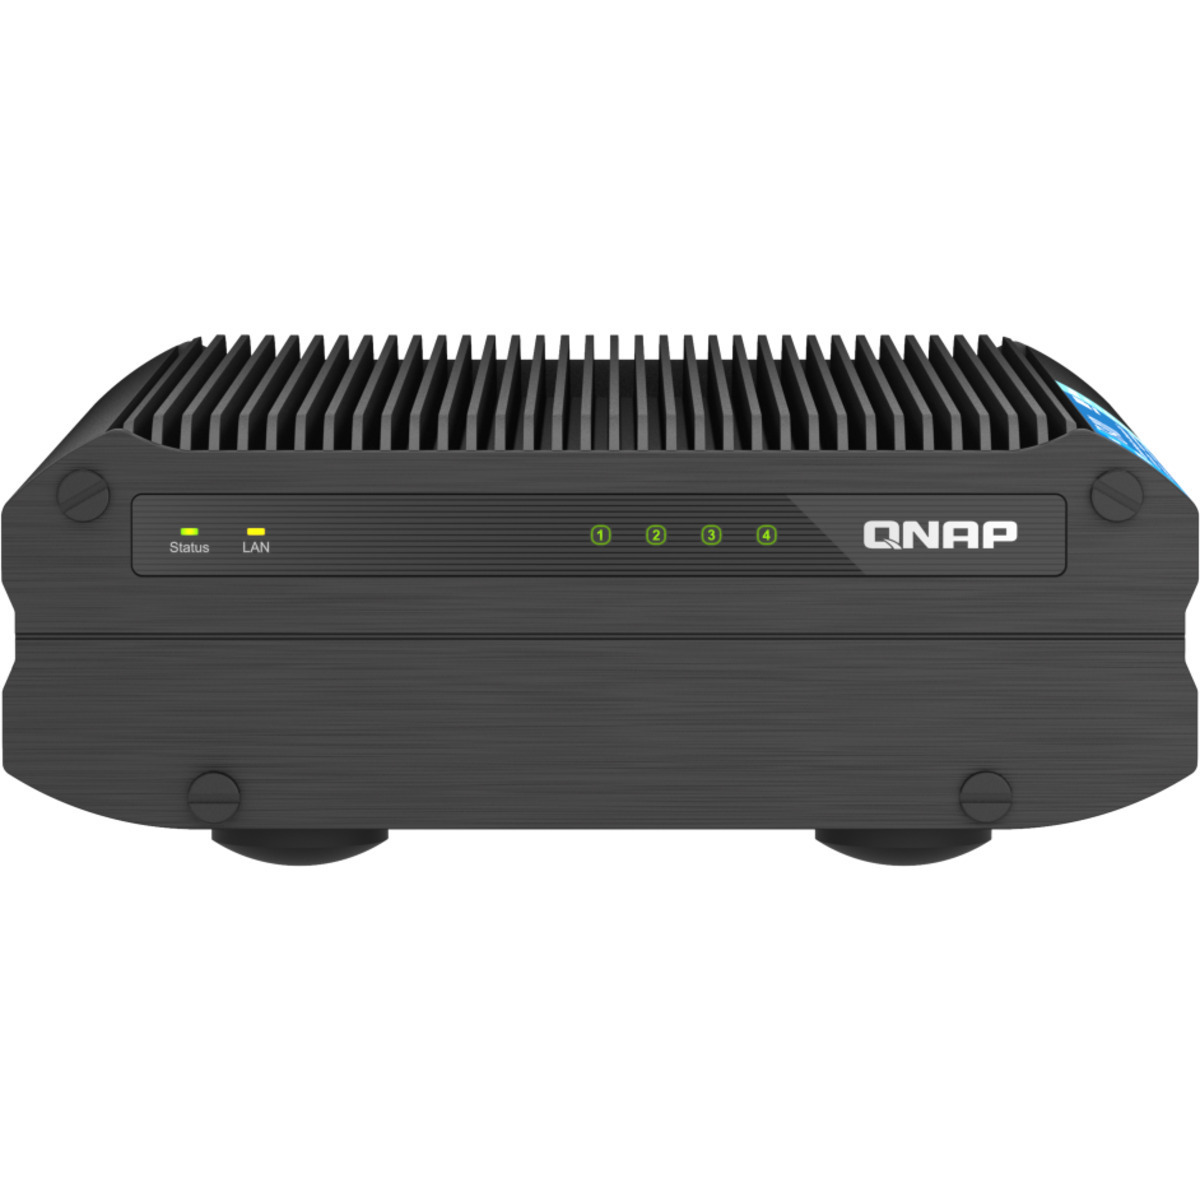 QNAP TS-i410X Desktop 4-Bay Multimedia / Power User / Business NAS - Network Attached Storage Device Burn-In Tested Configurations TS-i410X